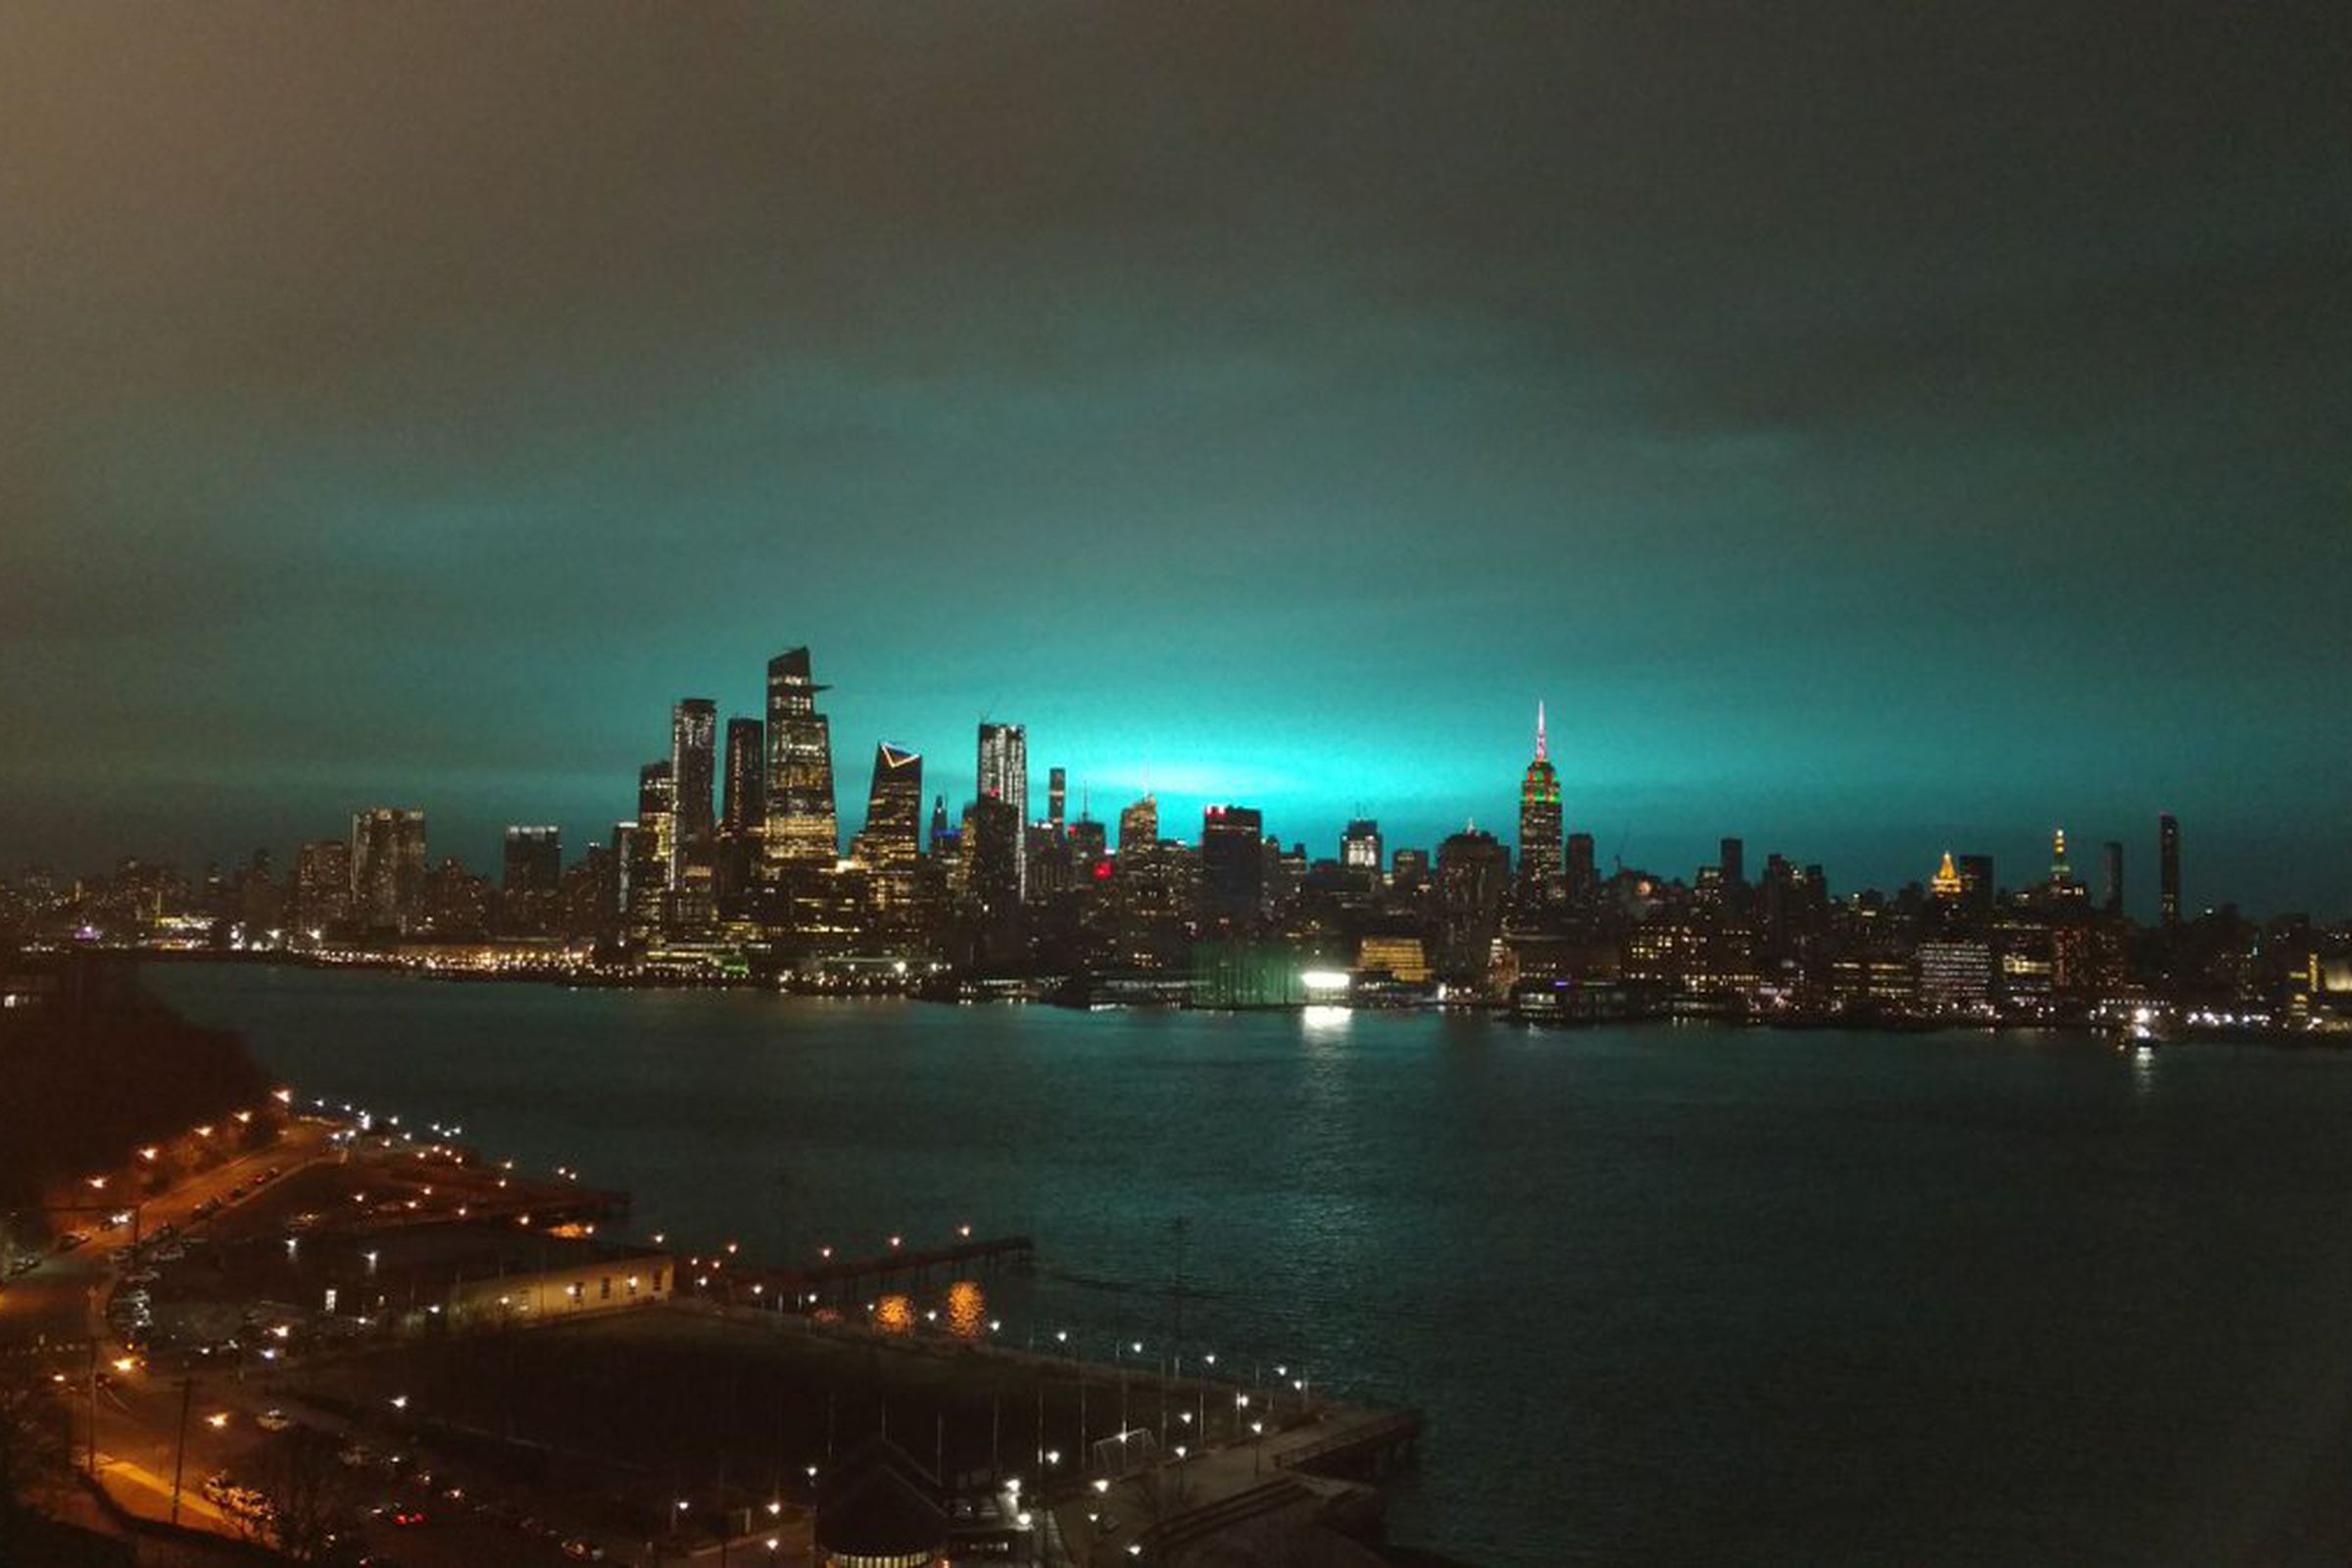 The blue glow that lit up the New York City skyline last night was the result of a fire at an electrical substation in Queens.